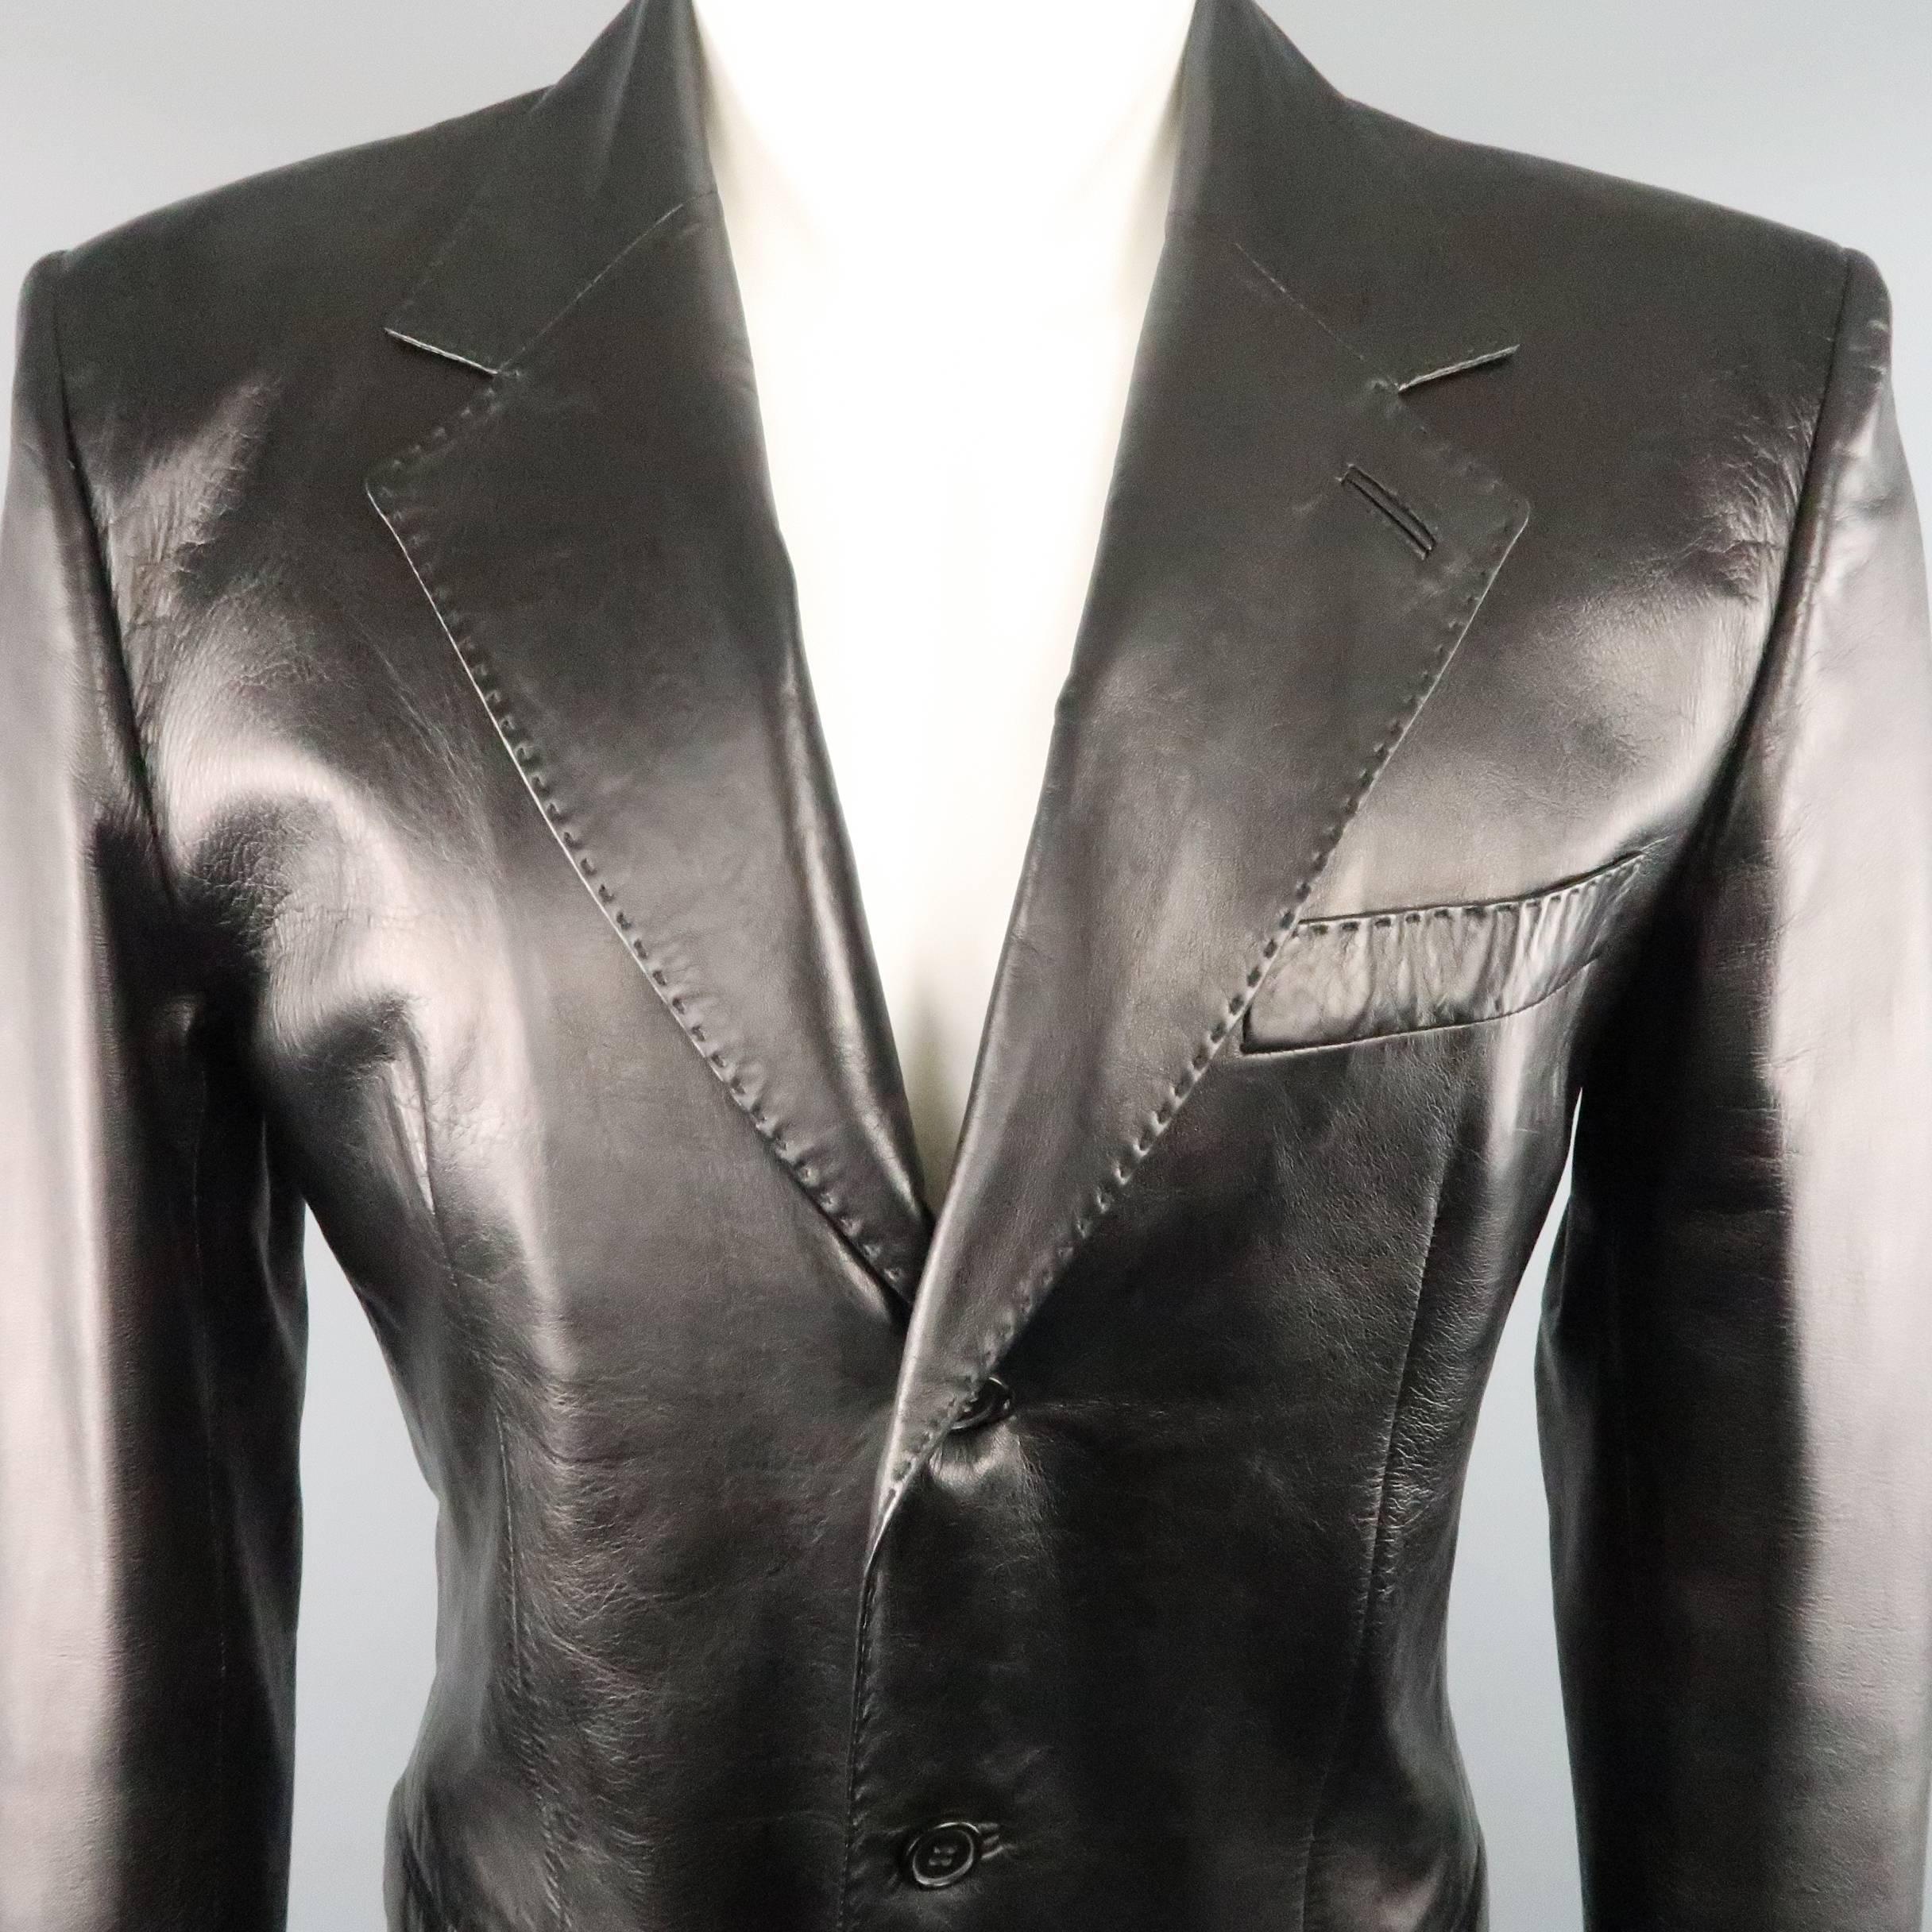 YVES SAINT LAURENT by TOM FORD sport coat jacket comes in a soft black leather and features a notch lapel with top stitching details, three button closure, flap pockets, functional button cuffs, and double vented back. Made in Italy.
 
Excellent